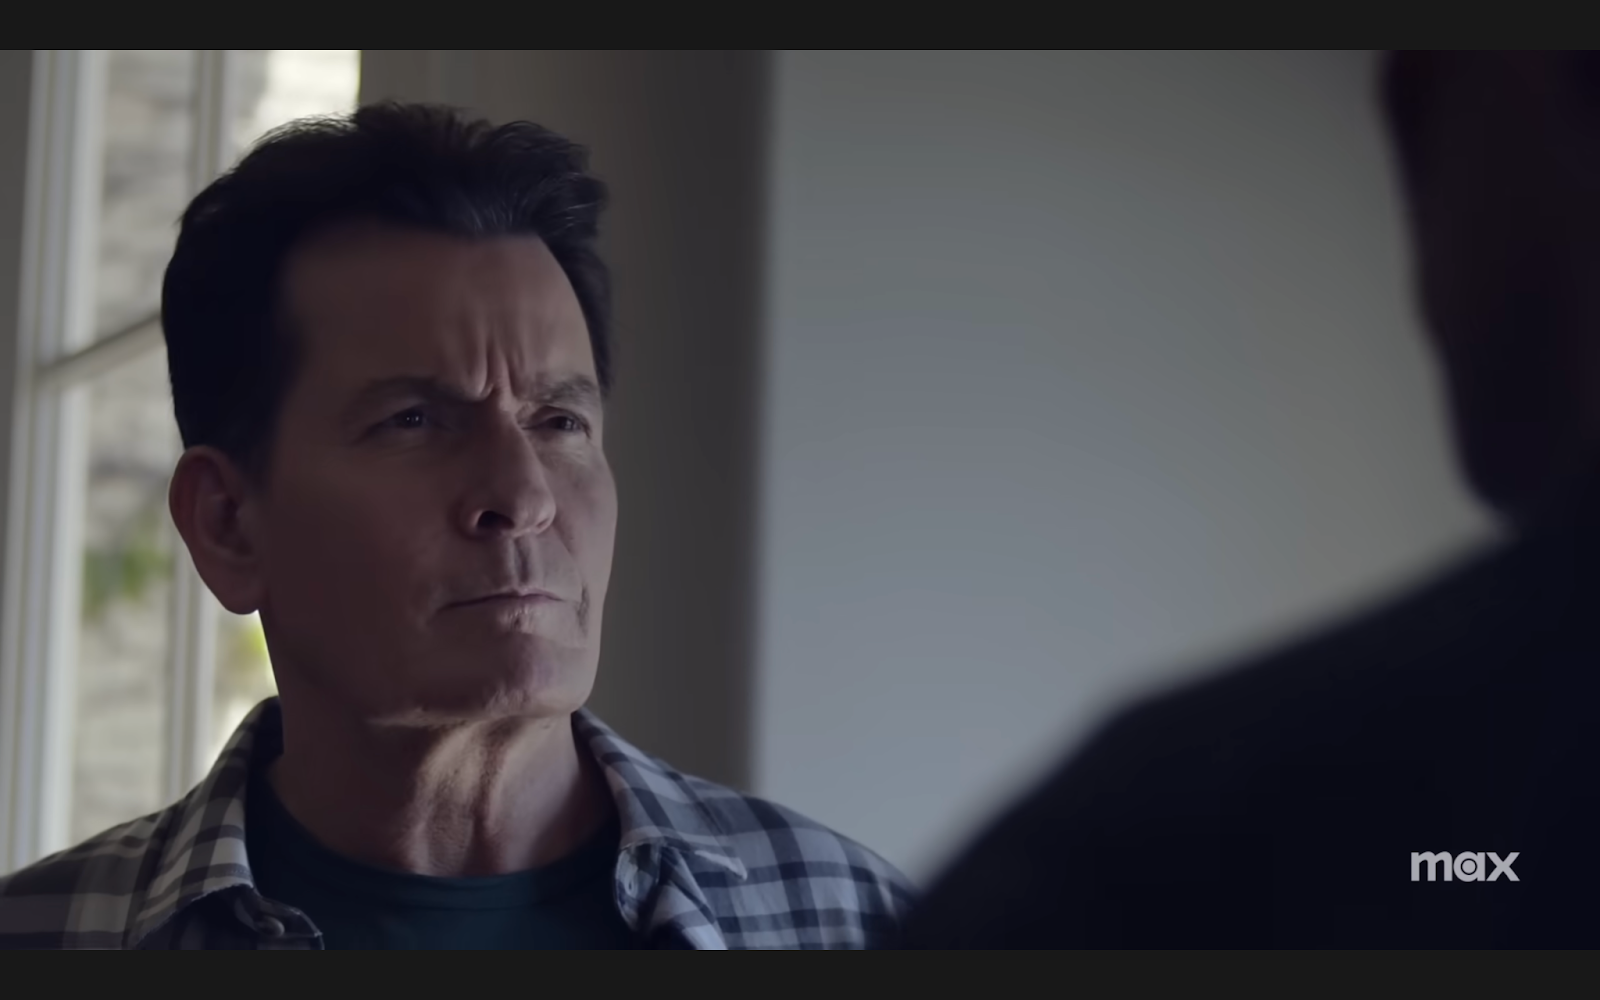 Charlie Sheen on the show "Bookie" | Source: Youtube.com/Max